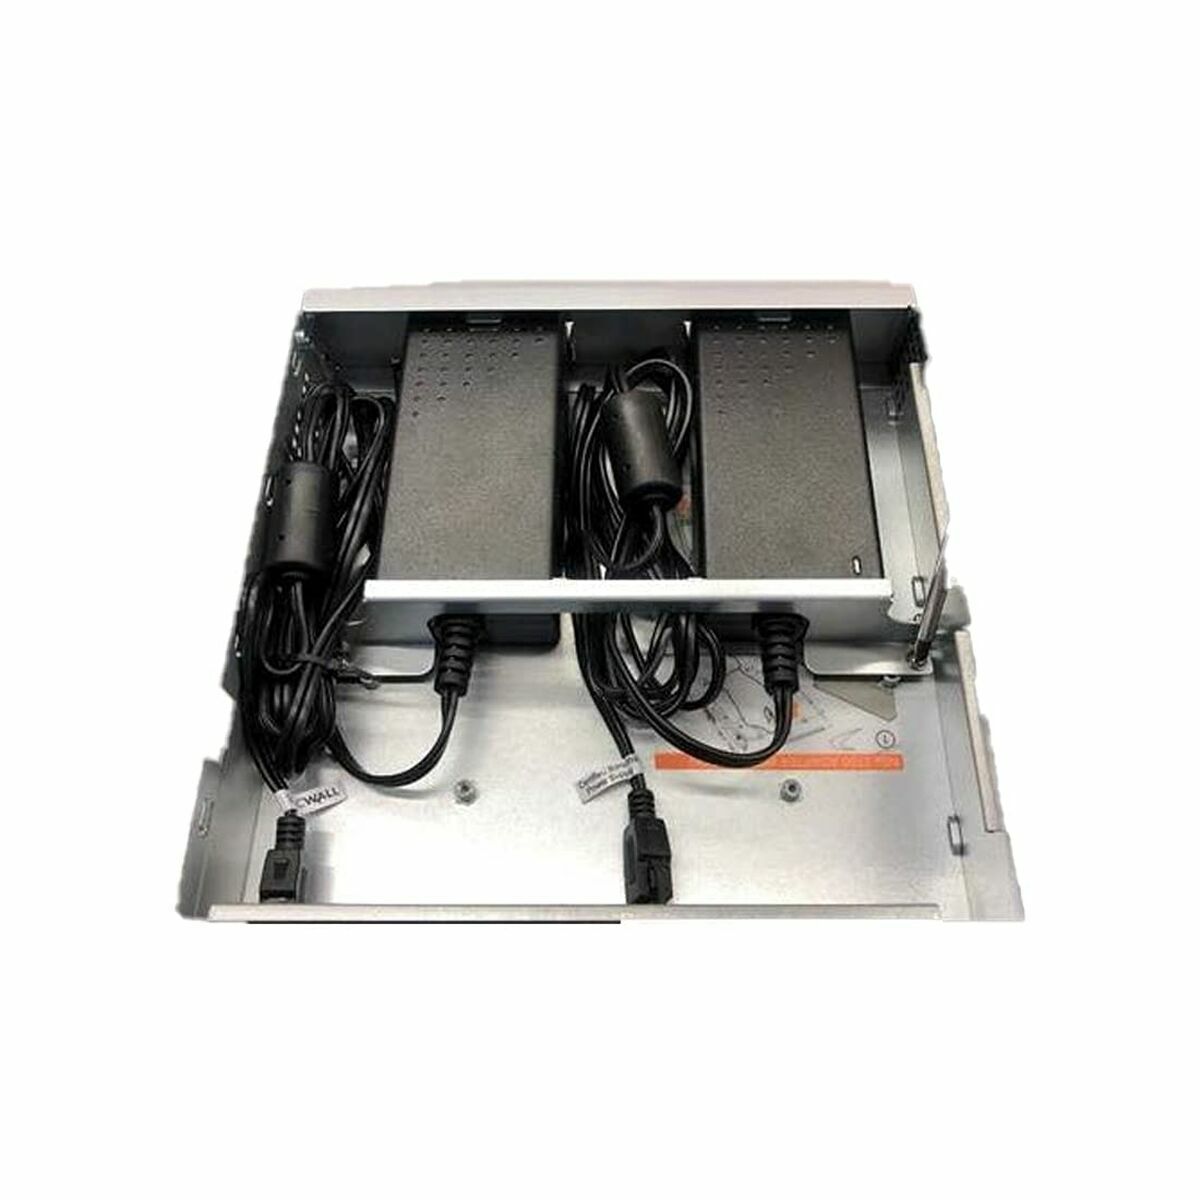 Power supply SonicWall 02-SSC-3078, SonicWall, Computing, Components, power-supply-sonicwall-02-ssc-3078, Brand_SonicWall, category-reference-2609, category-reference-2803, category-reference-2816, category-reference-t-19685, category-reference-t-19912, category-reference-t-21360, computers / components, Condition_NEW, ferretería, Price_50 - 100, Teleworking, RiotNook